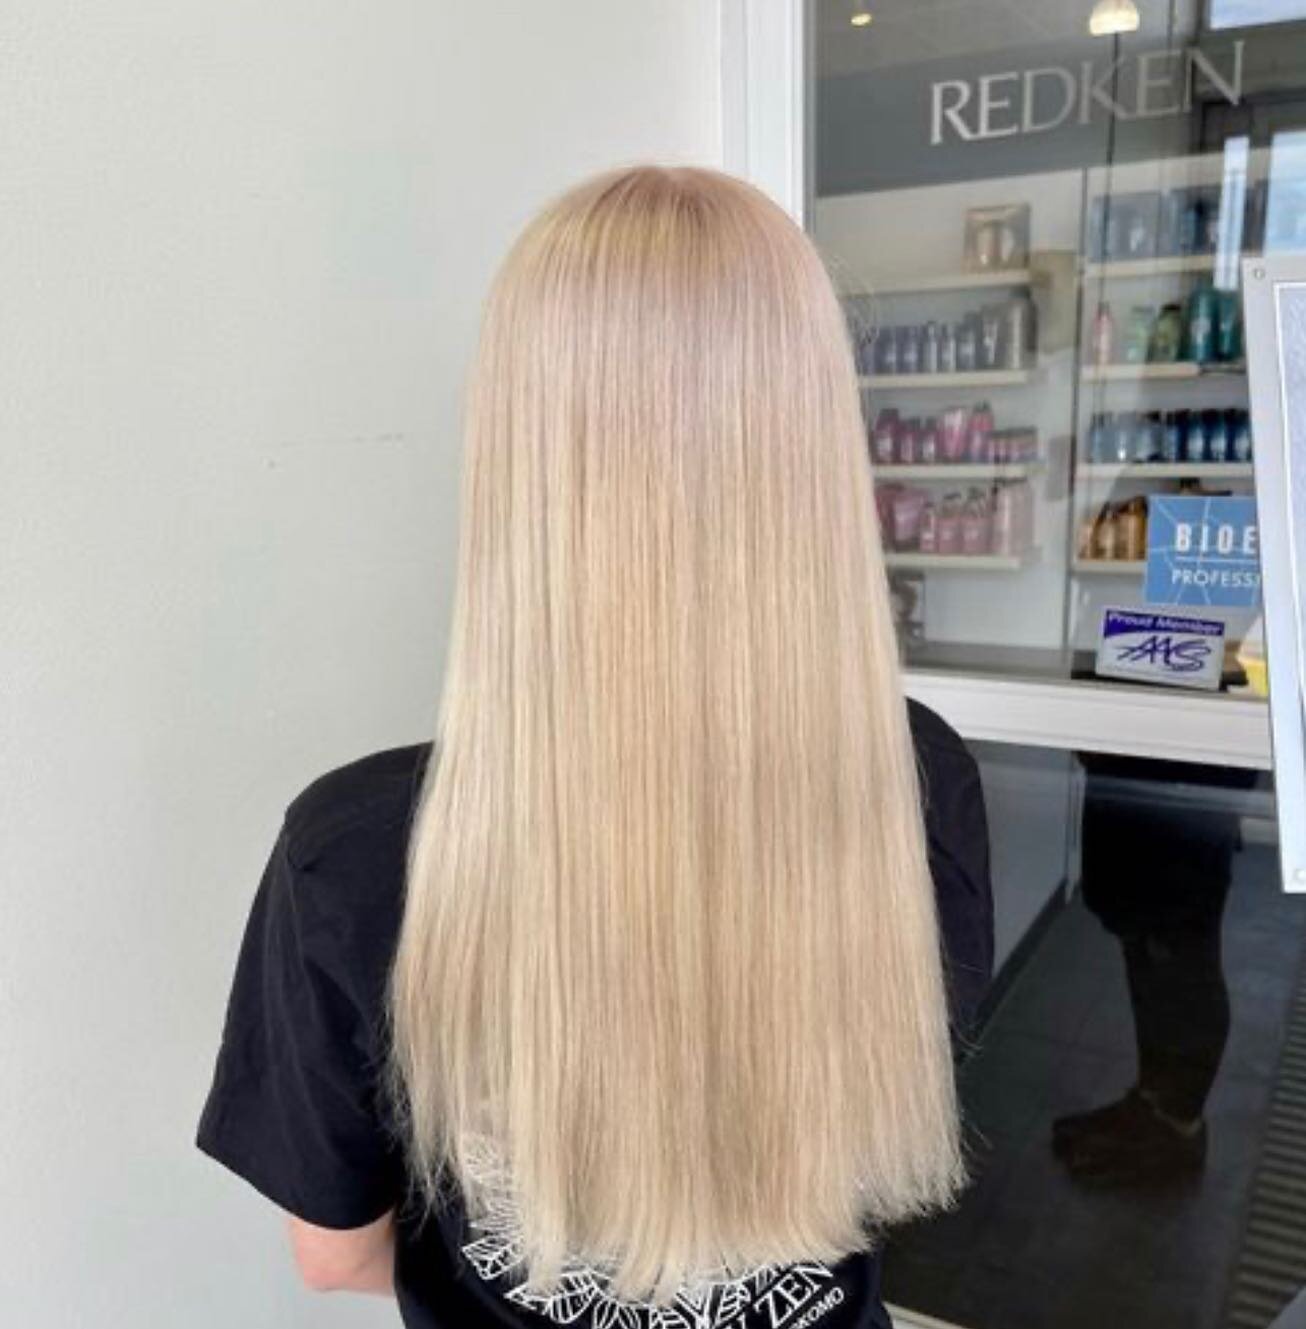 &quot;I like to feel blonde all over.&quot; &mdash; Marilyn Monroe
Stylist: @brooklynrudebeauty